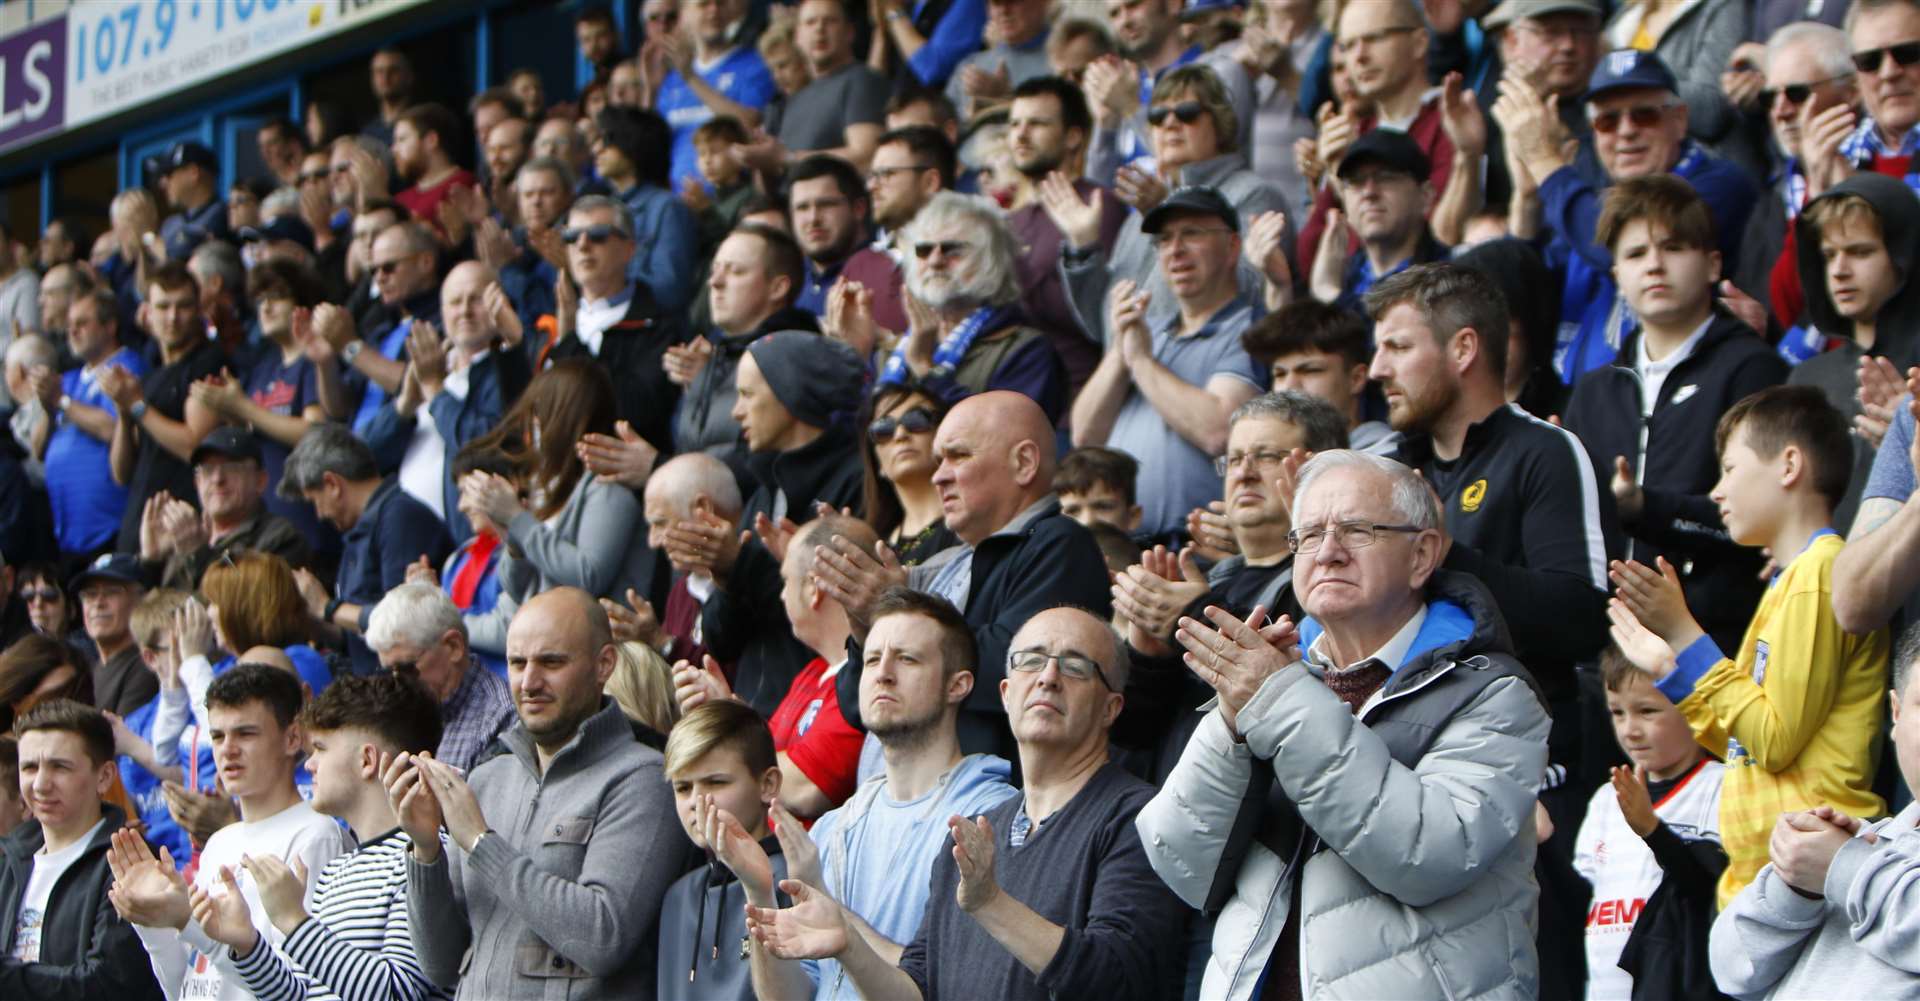 Gills fans take part in a minute's applause in memory of Ray Wilkins prior to kick-off. Picture: Andy Jones